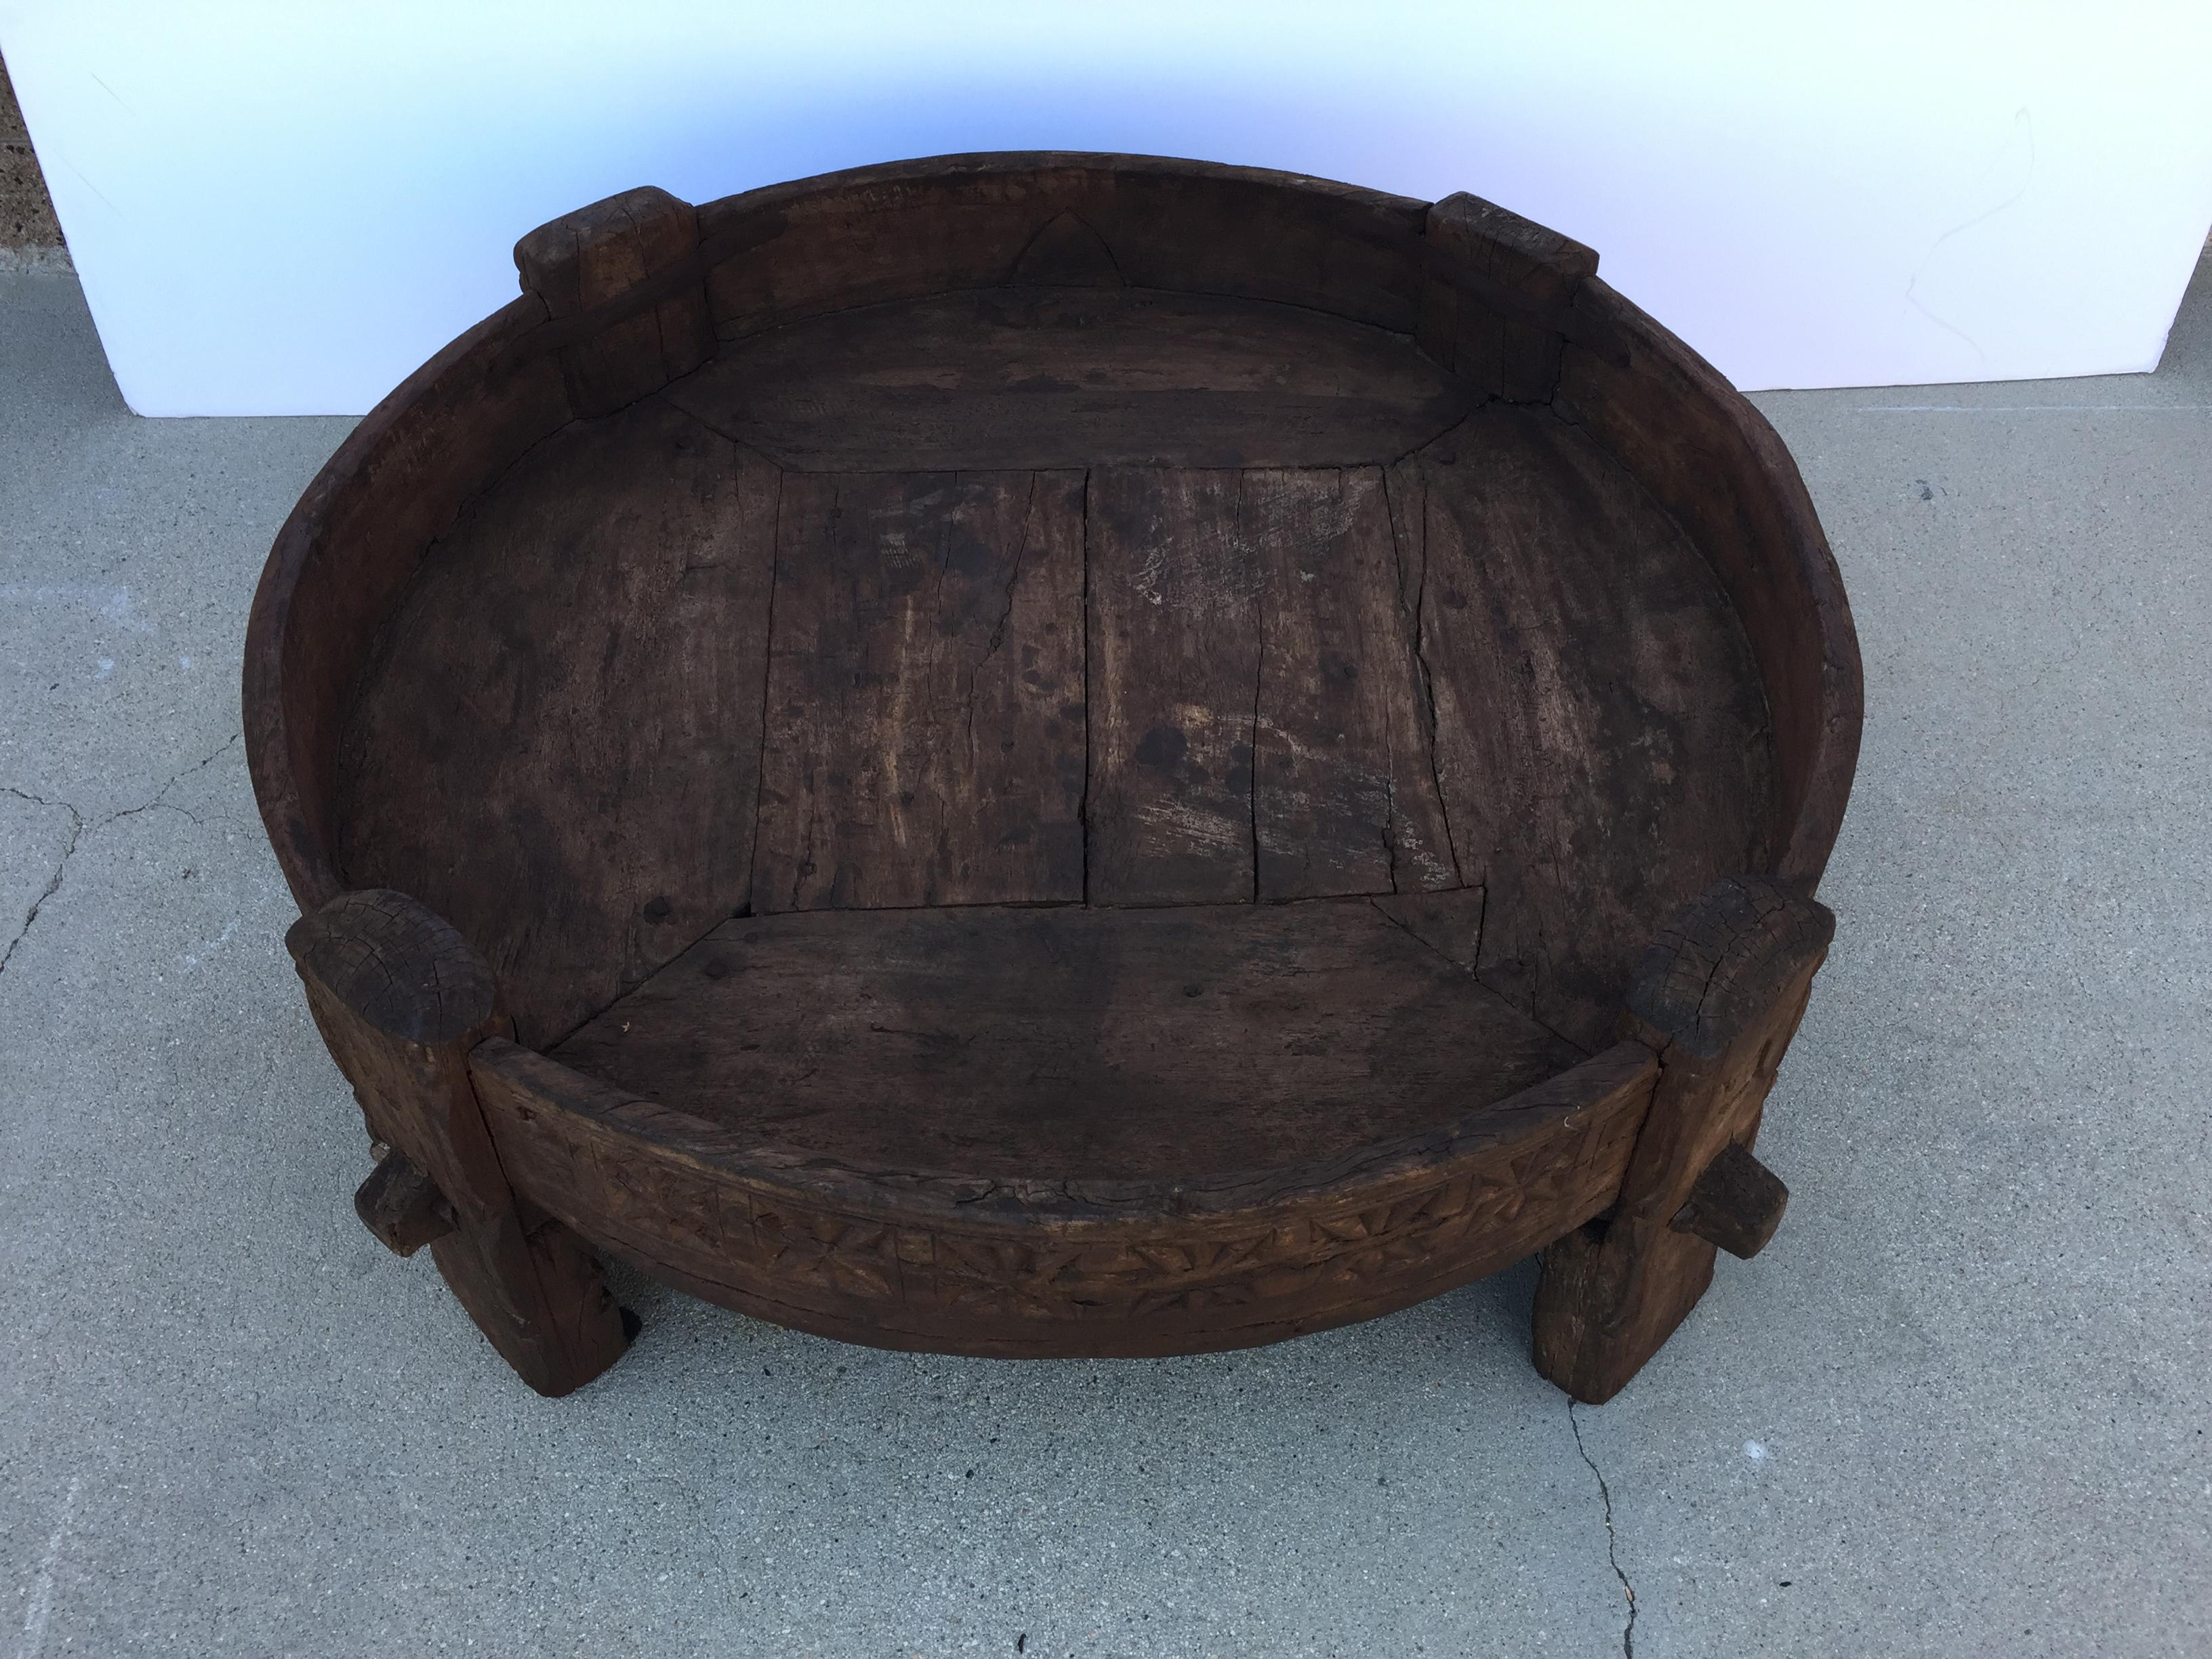 Large hand carved wood Indian grinder tribal table.
Dark walnut color hand carved with geometric African design.
Handcrafted of wood and iron, hand carved with geometric Ethnic tribal design.
Very sturdy rustic wood table with nice patina,